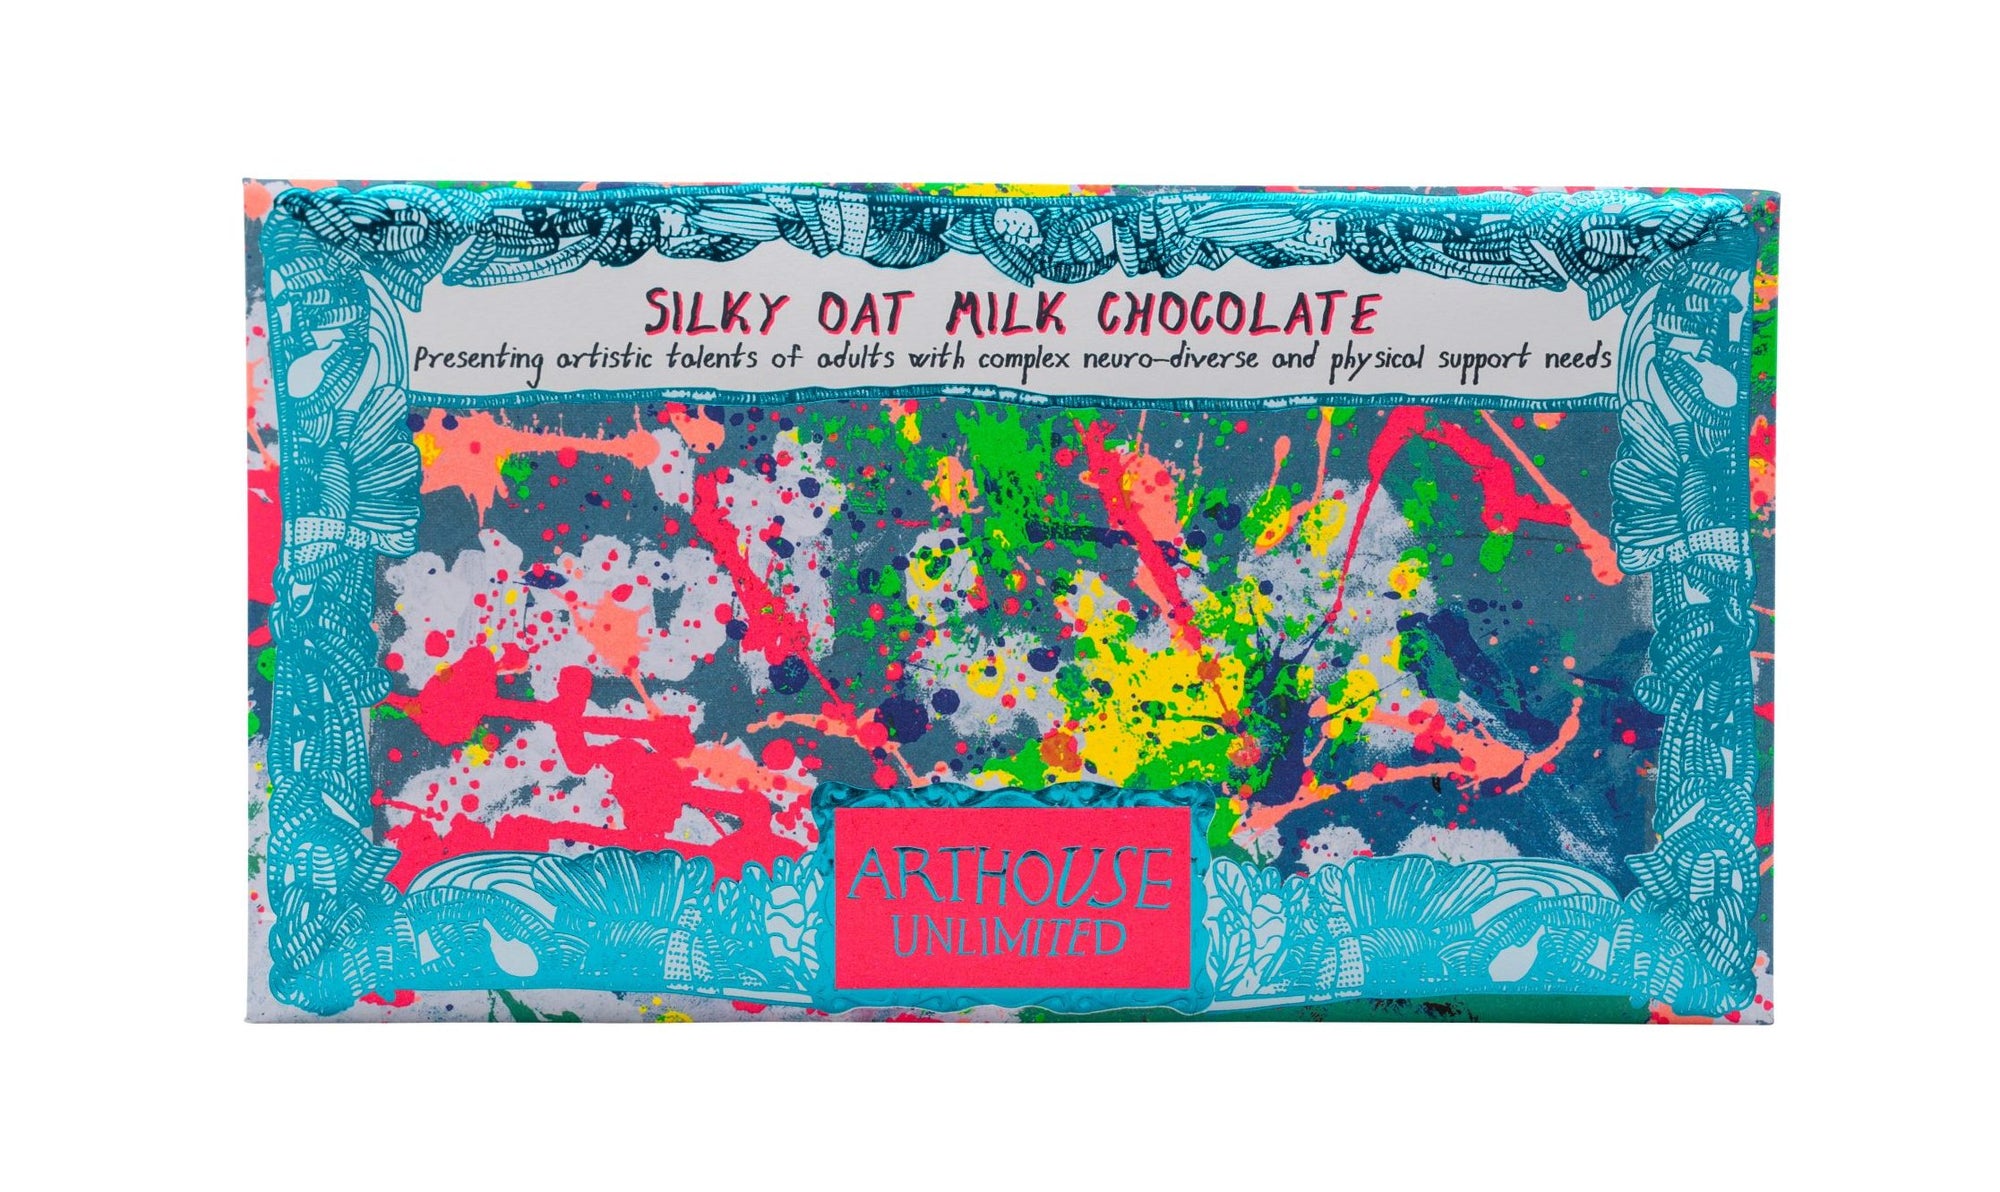 Spring Chocolate Bar - Oat Milk Chocolate by penny black